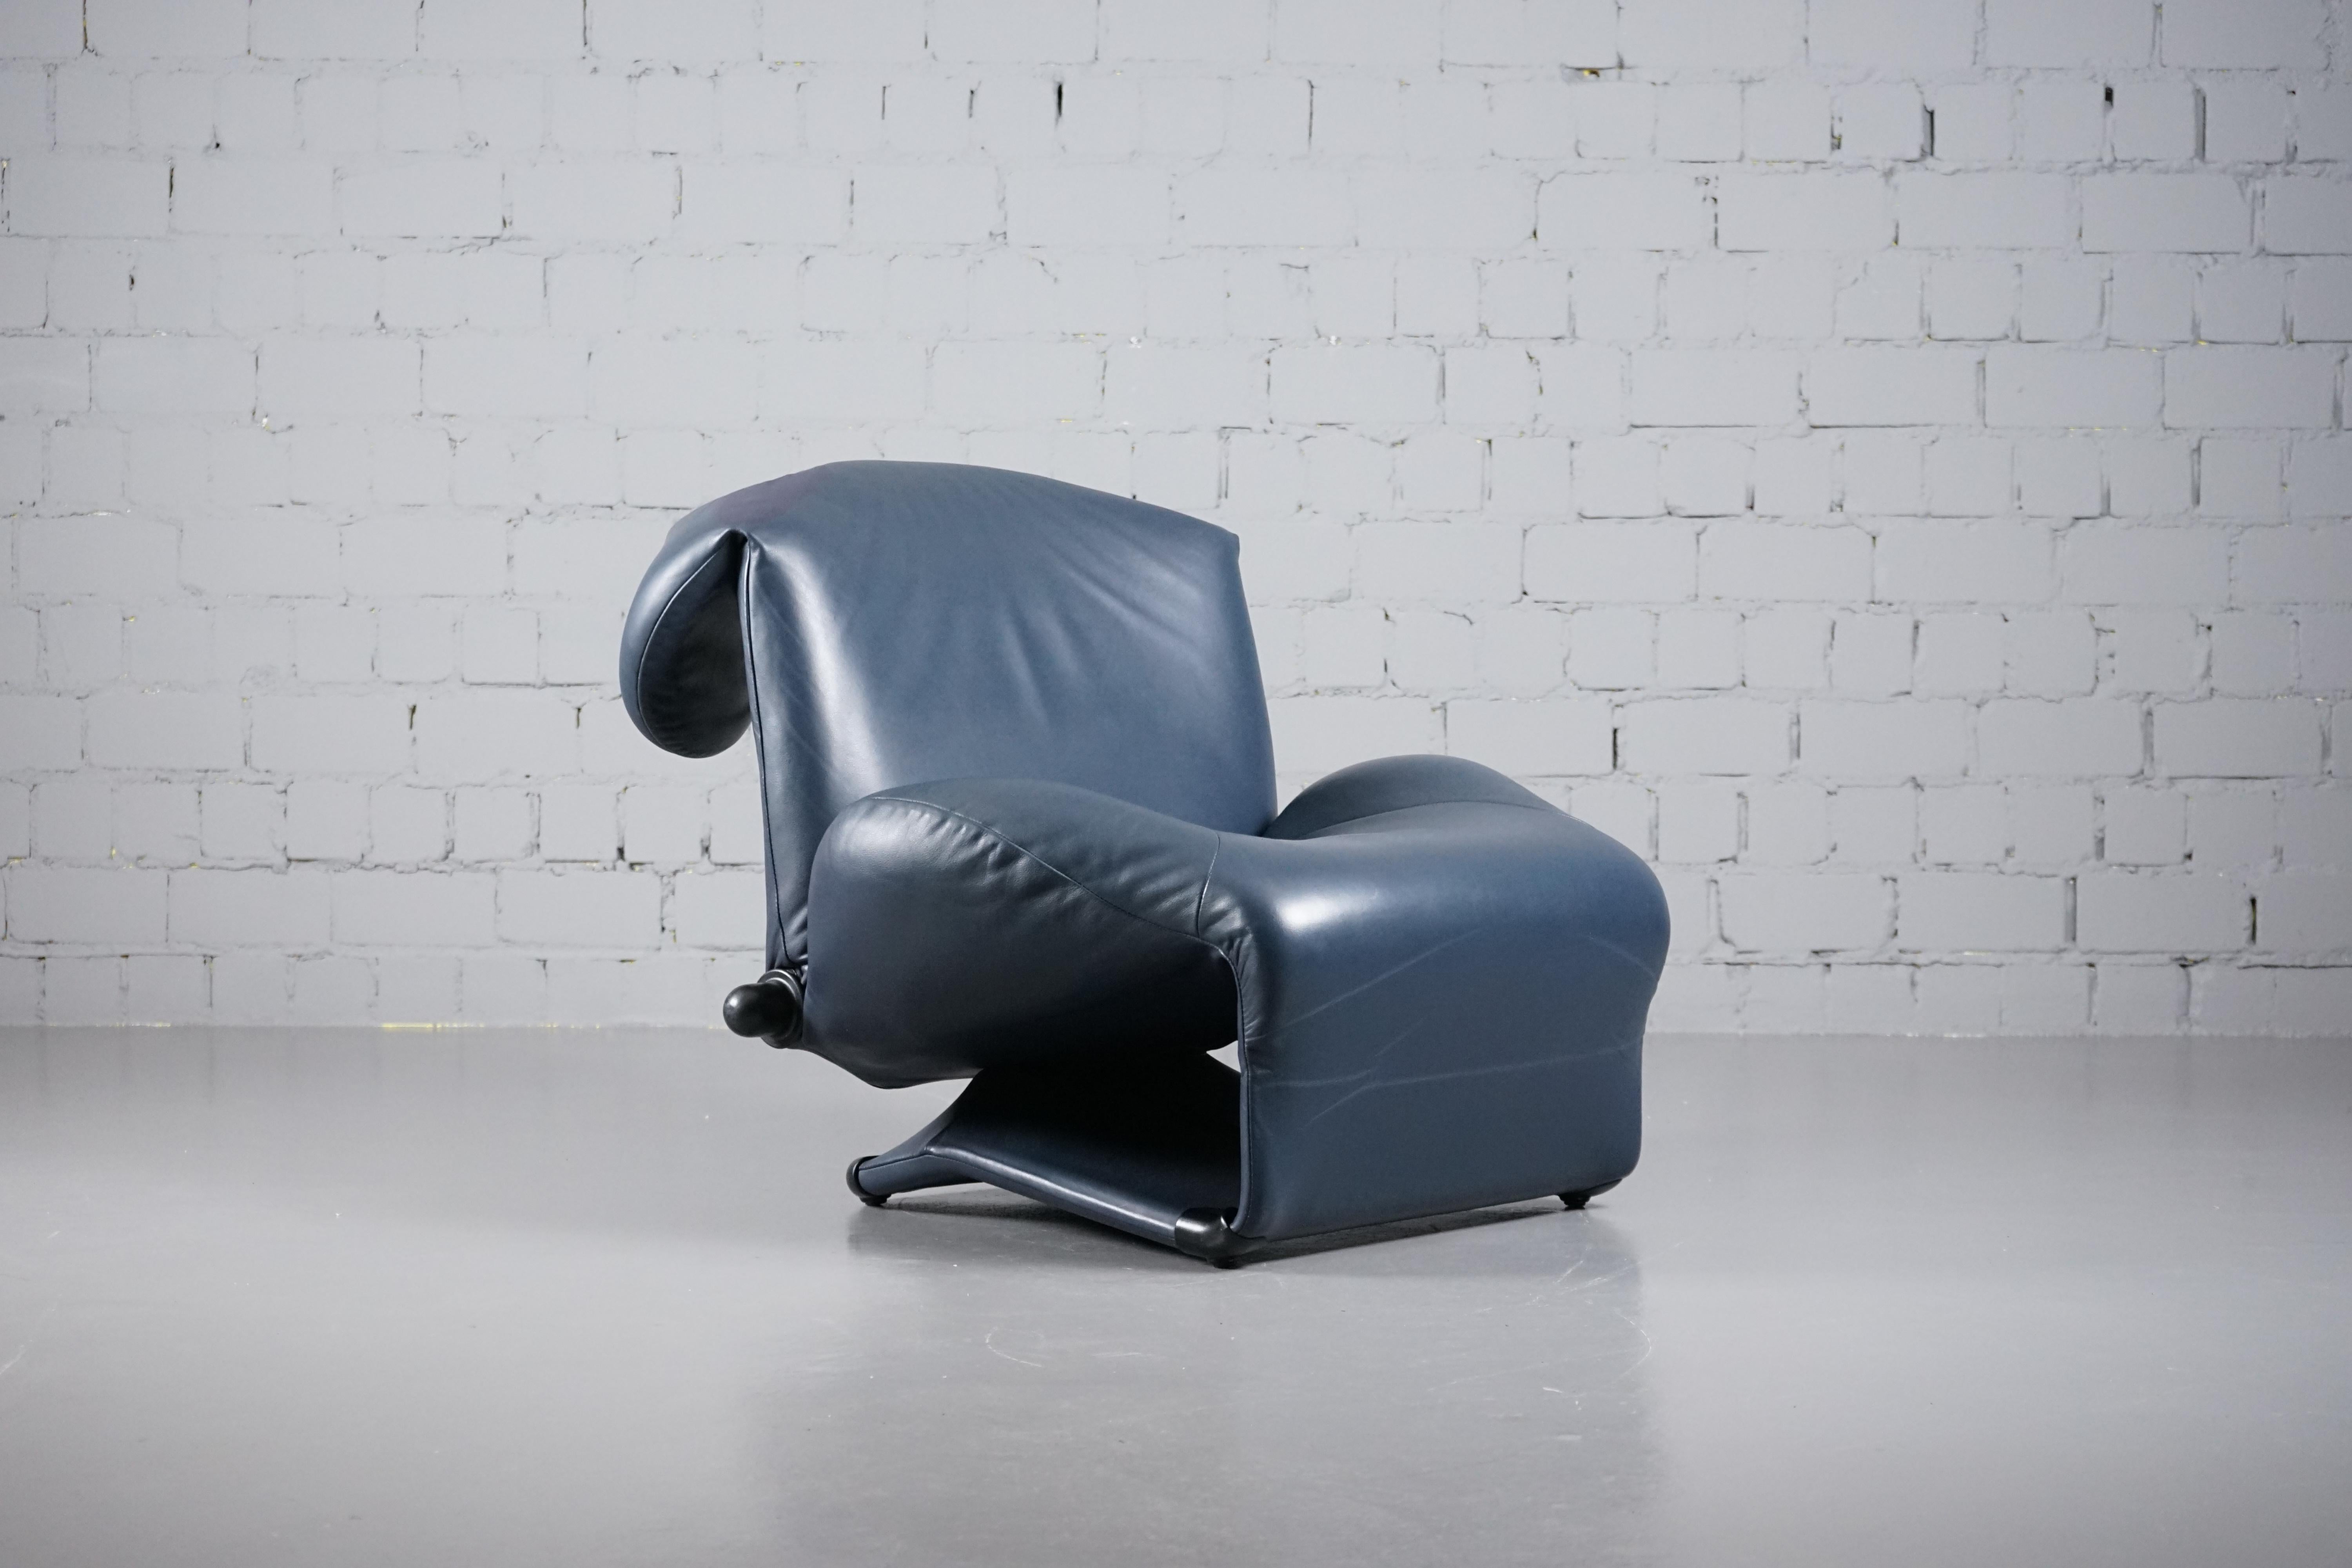 Grey-Blue Leather Wink Lounge Chair by Toshiyuki Kita for Cassina, 1980s For Sale 8